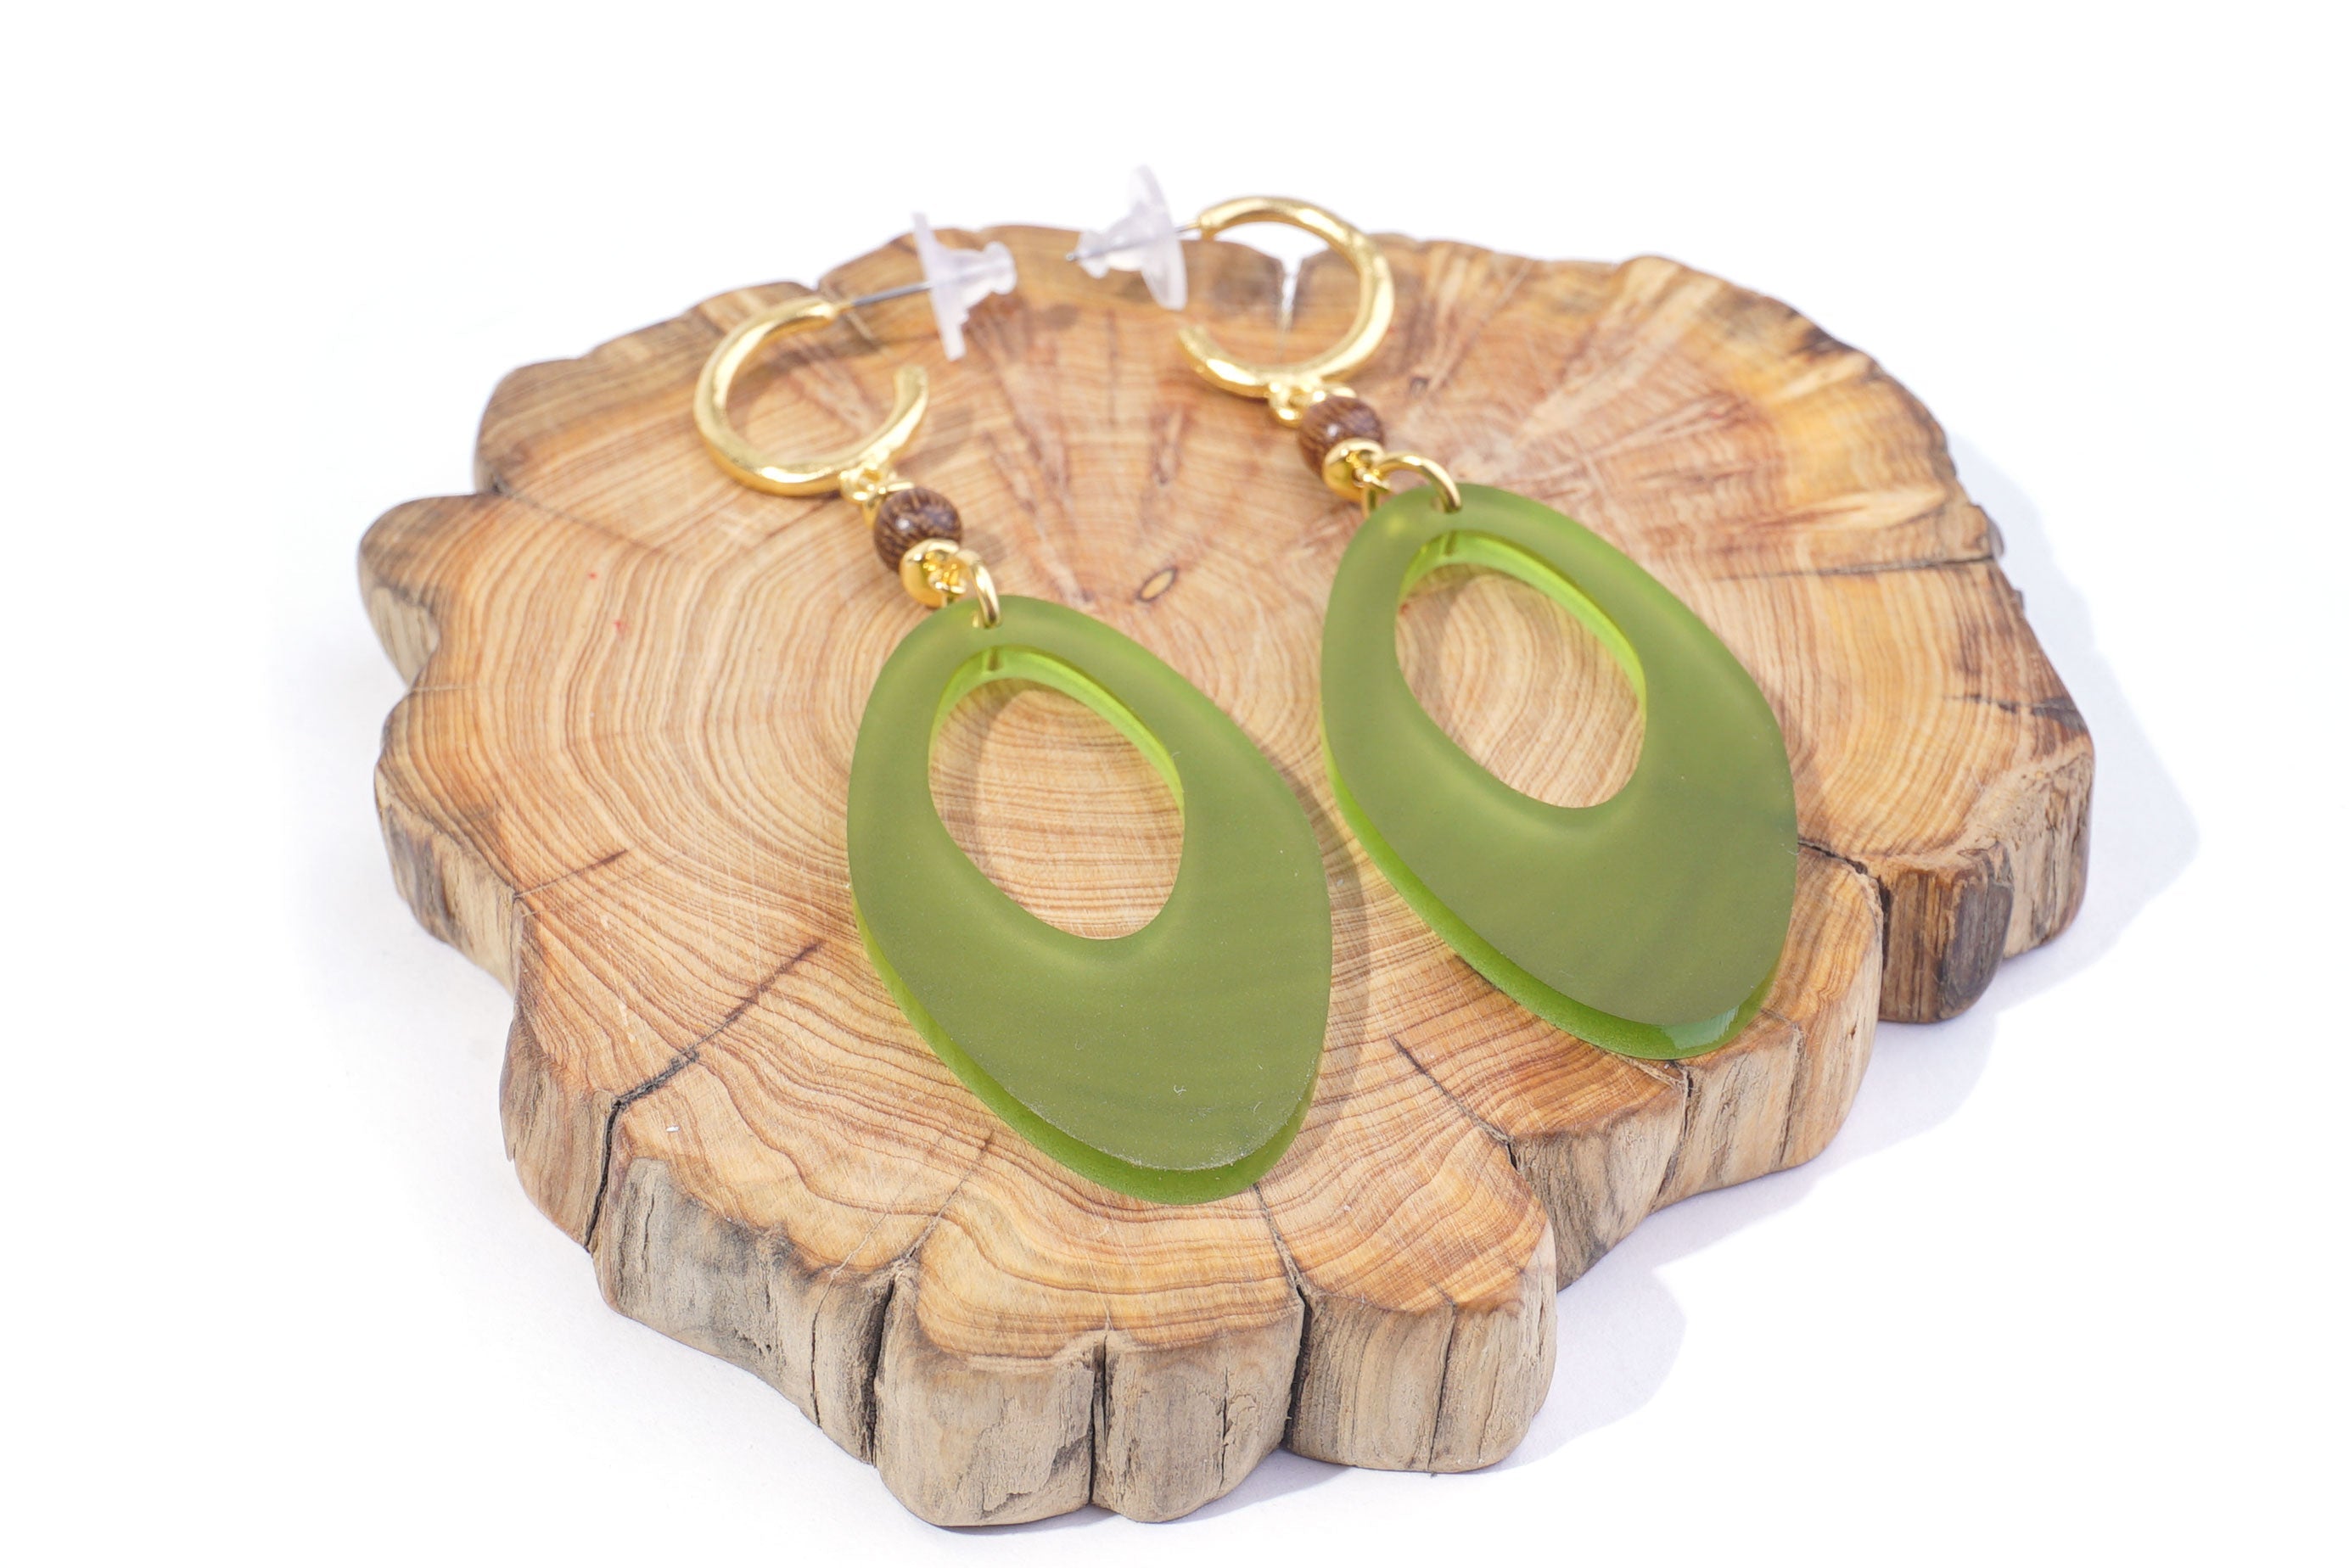 INSTRUCTIONS for DIY Retro Avocado with Gold Hoop Earrings - Goody Beads